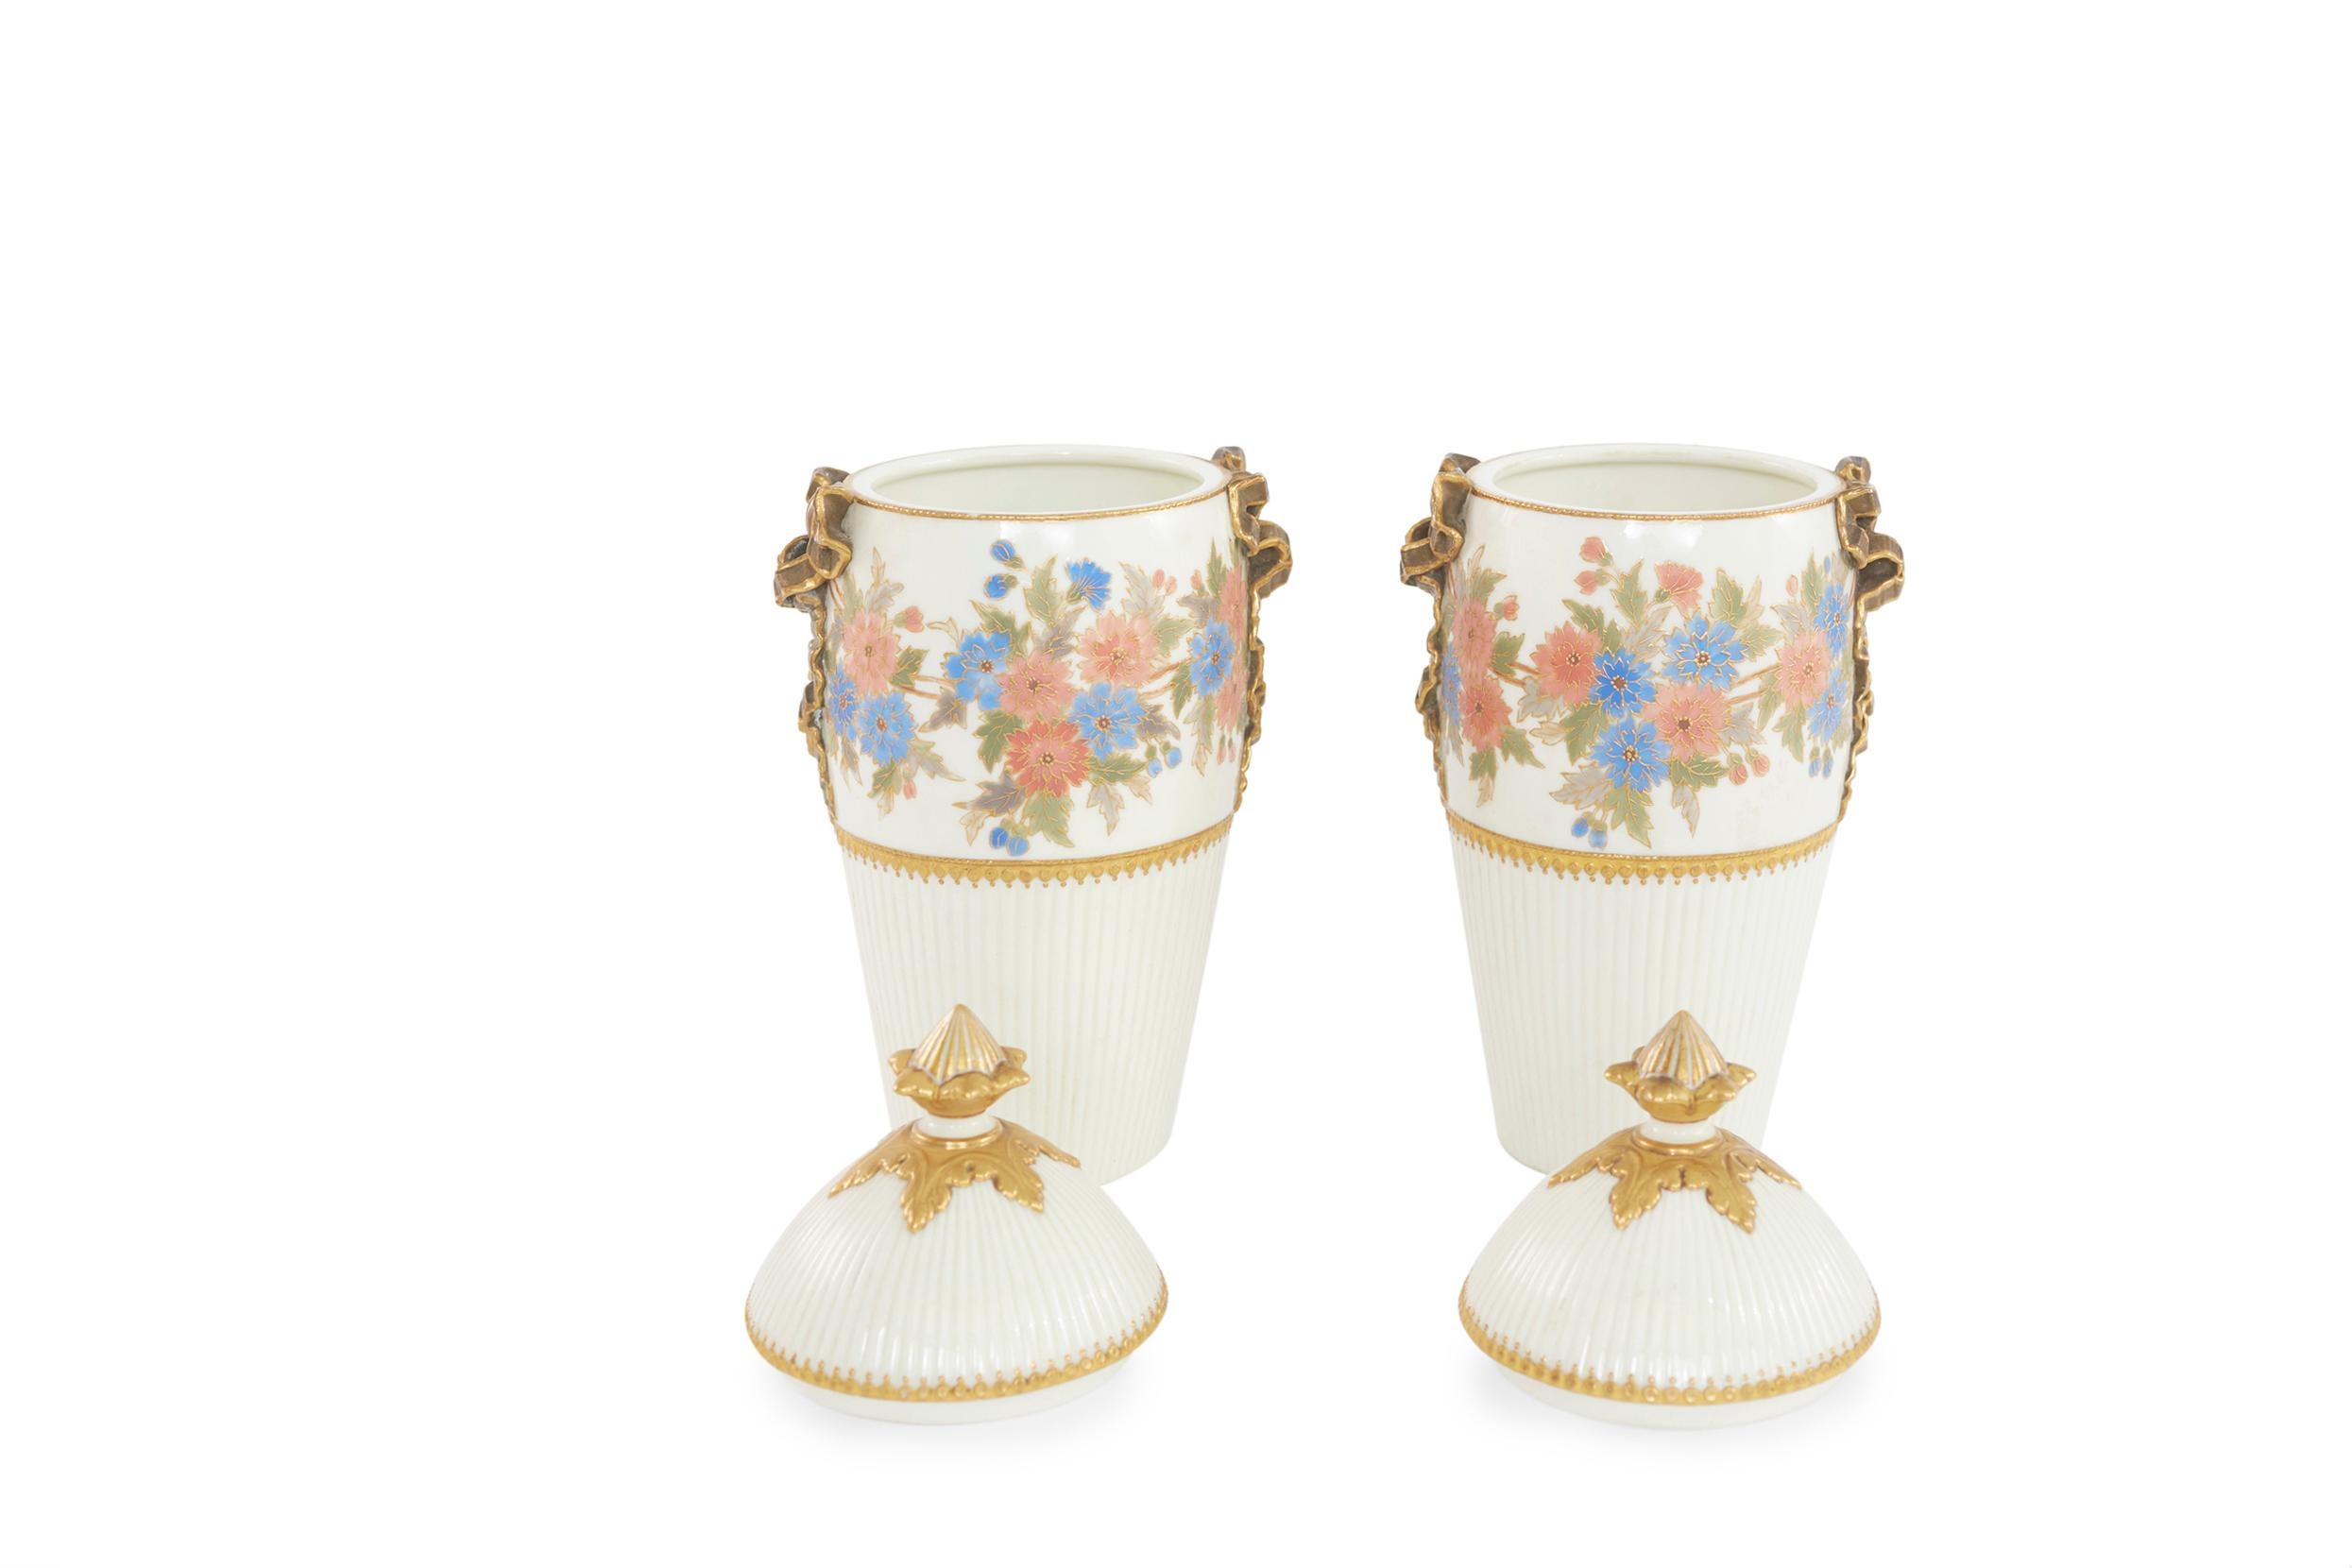 Hand-Painted Mid 19th Century Pair Covered Porcelain Urns For Sale